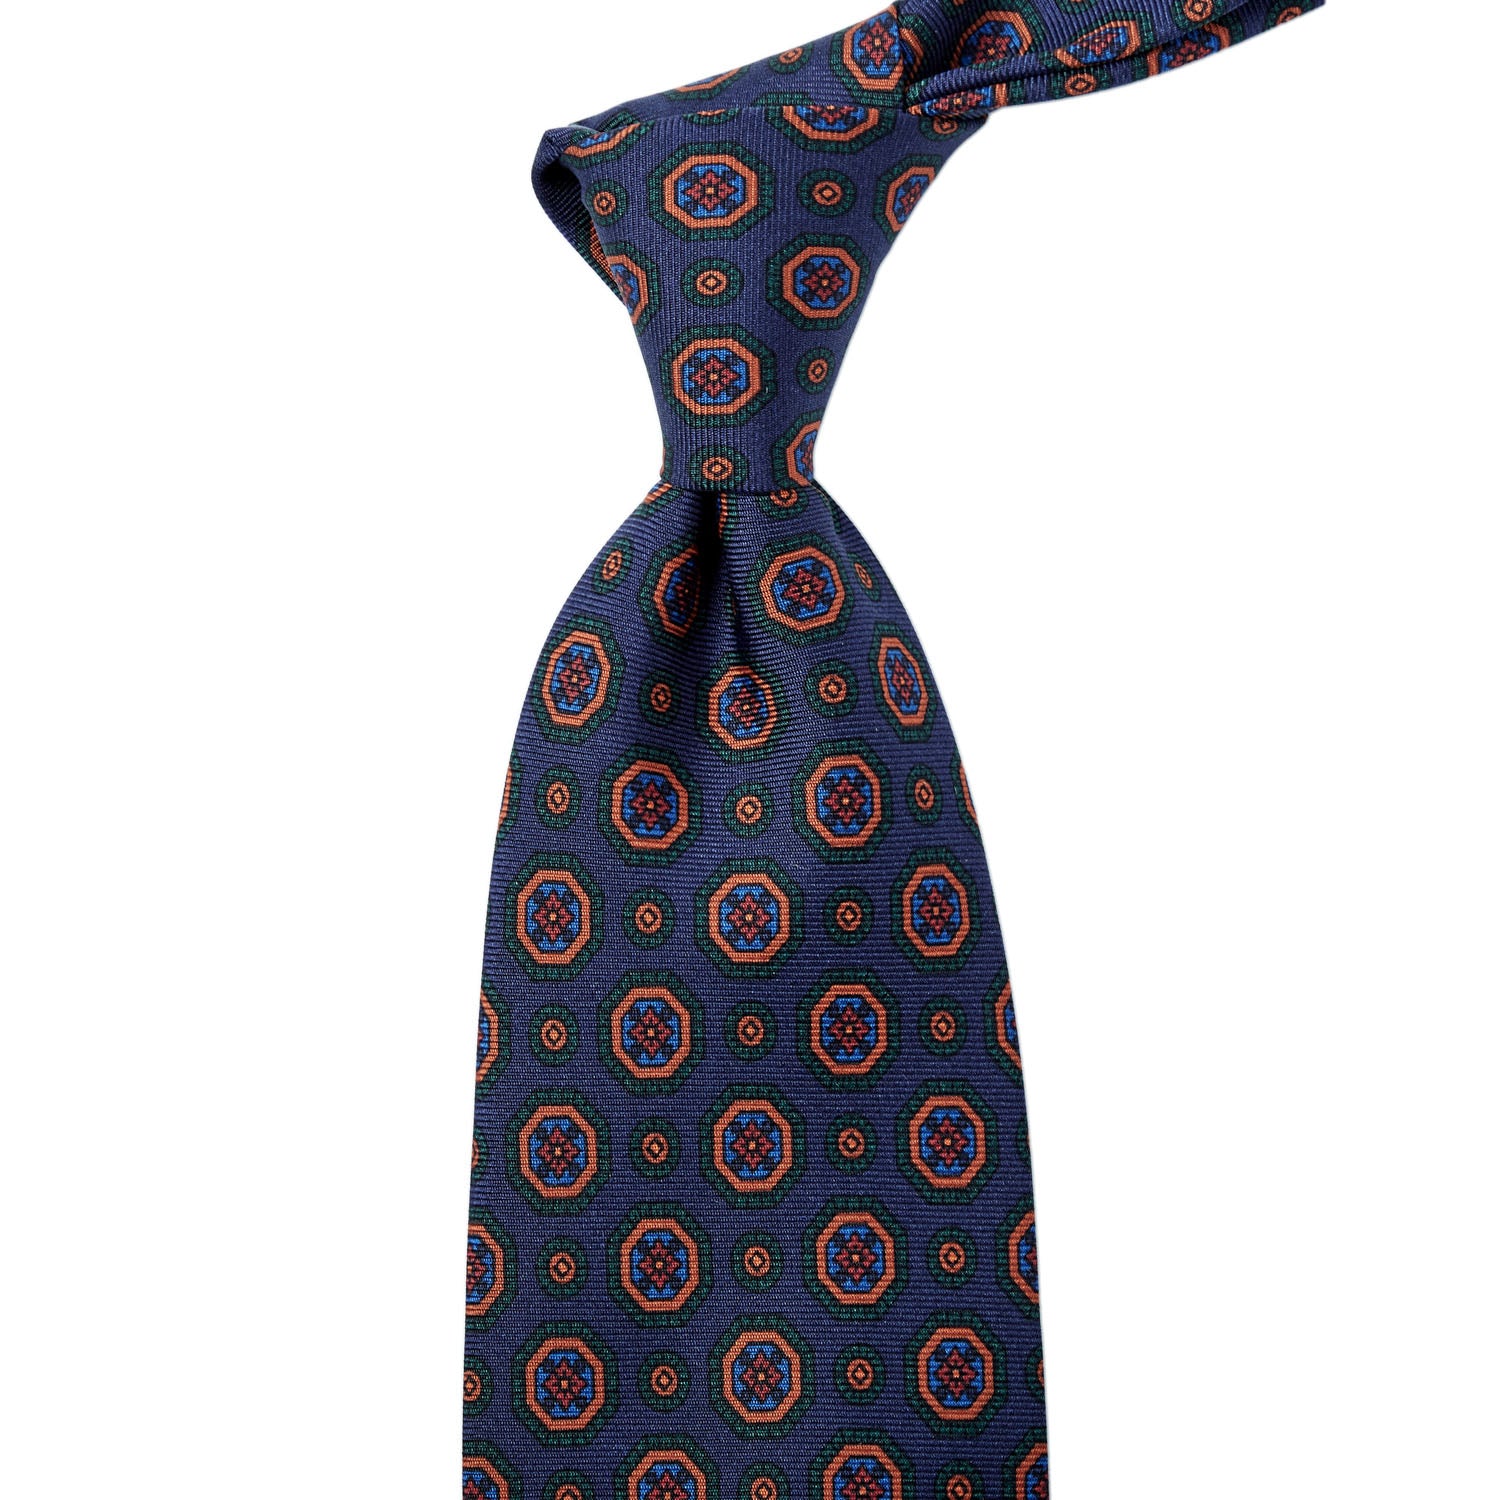 Handmade in the United Kingdom, this Sovereign Grade Dark Navy Geometric Ancient Madder Tie (150x8.5 cm) from KirbyAllison.com features a circular pattern of highest quality.